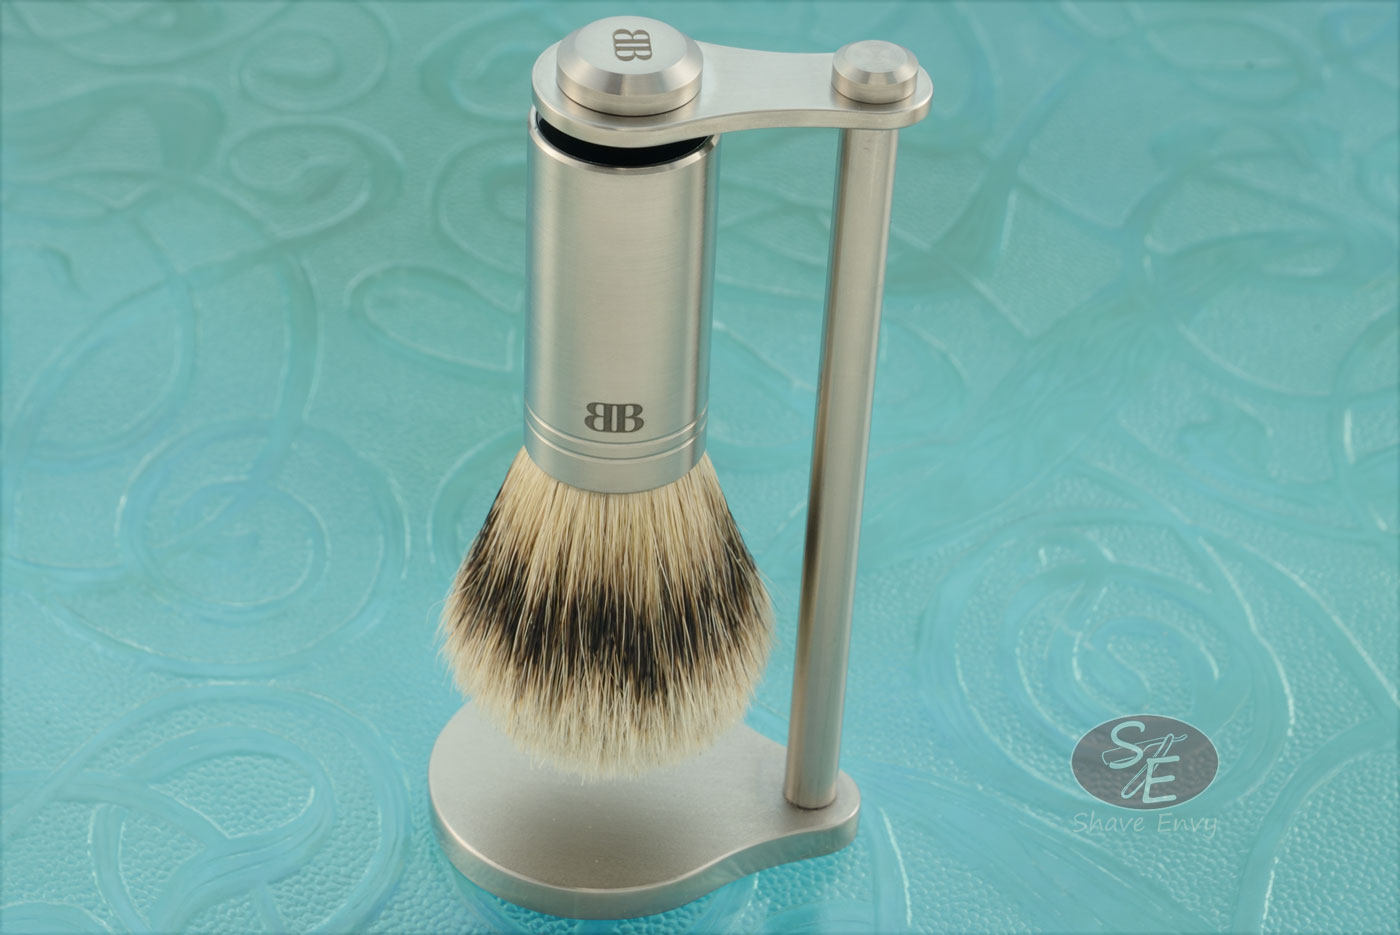 Silvertip Shaving Brush with Magnetic Stand - Satin Stainless Steel (22mm Knot)